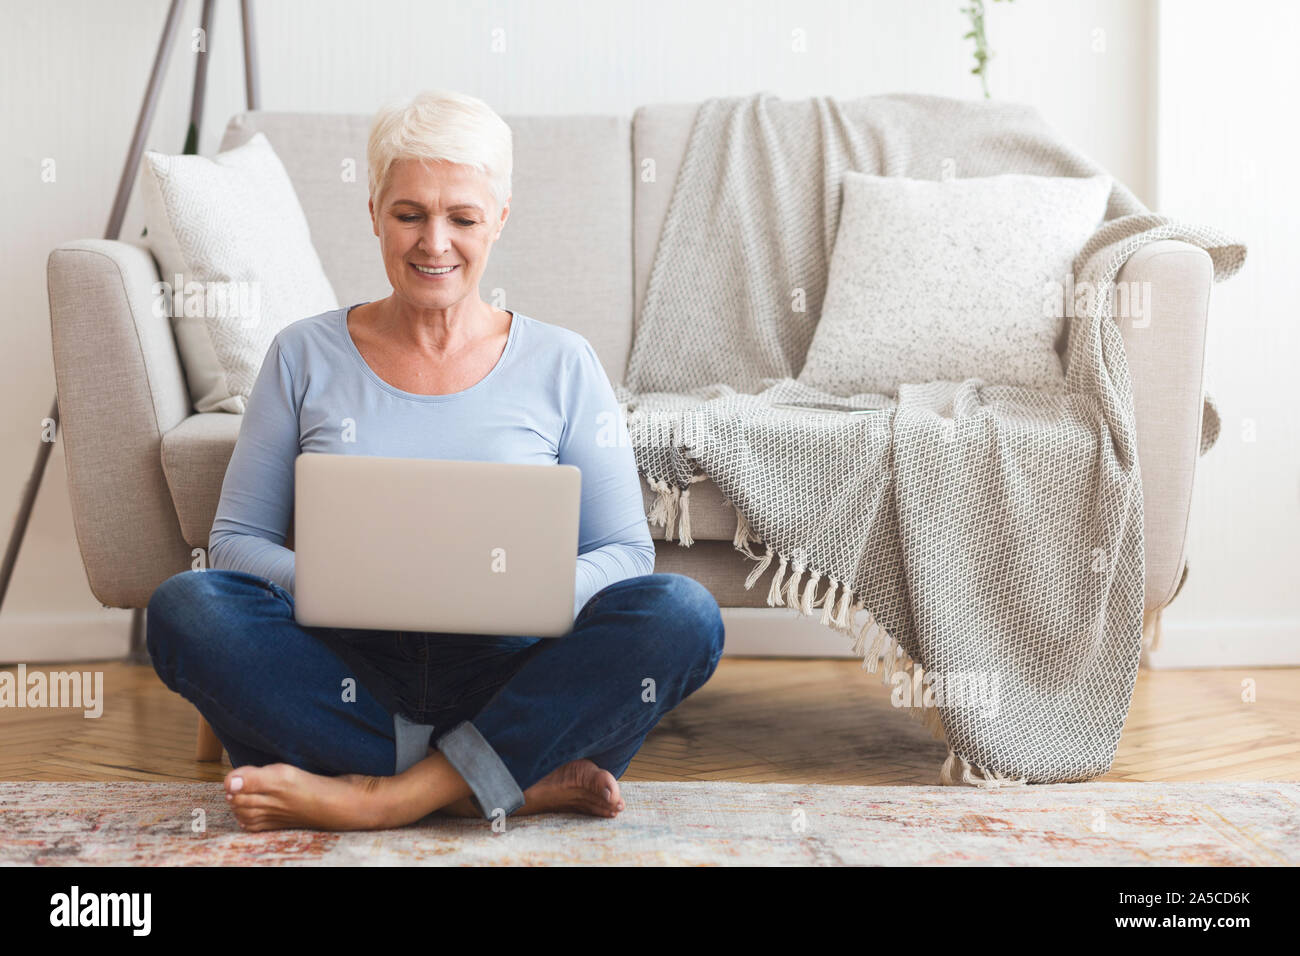 Resourceful mature woman sitting on floor and using laptop Stock Photo